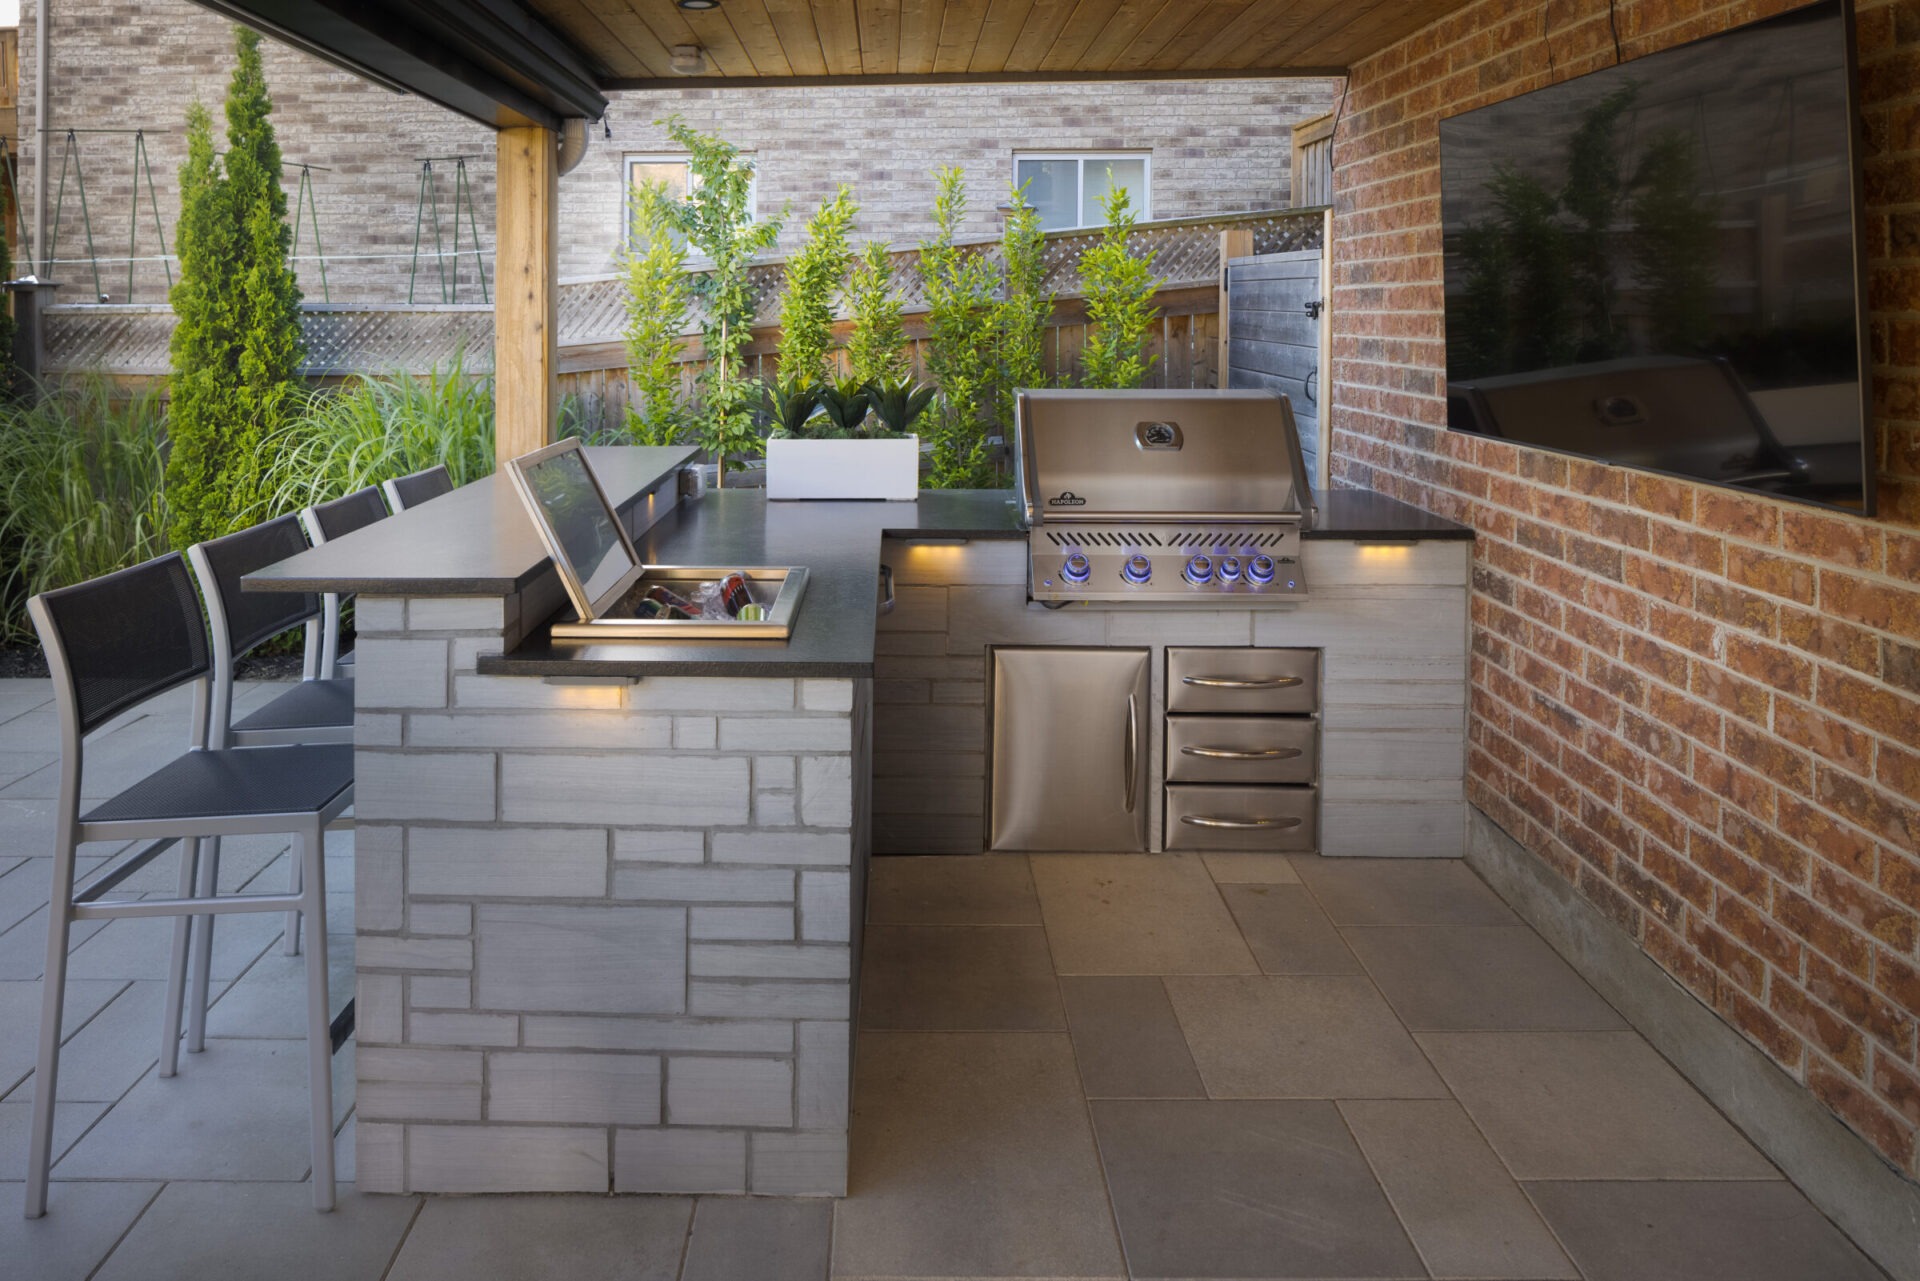 An outdoor kitchen with modern appliances, including a grill and refrigerator, complemented by a bar seating area, under a covered patio with greenery.